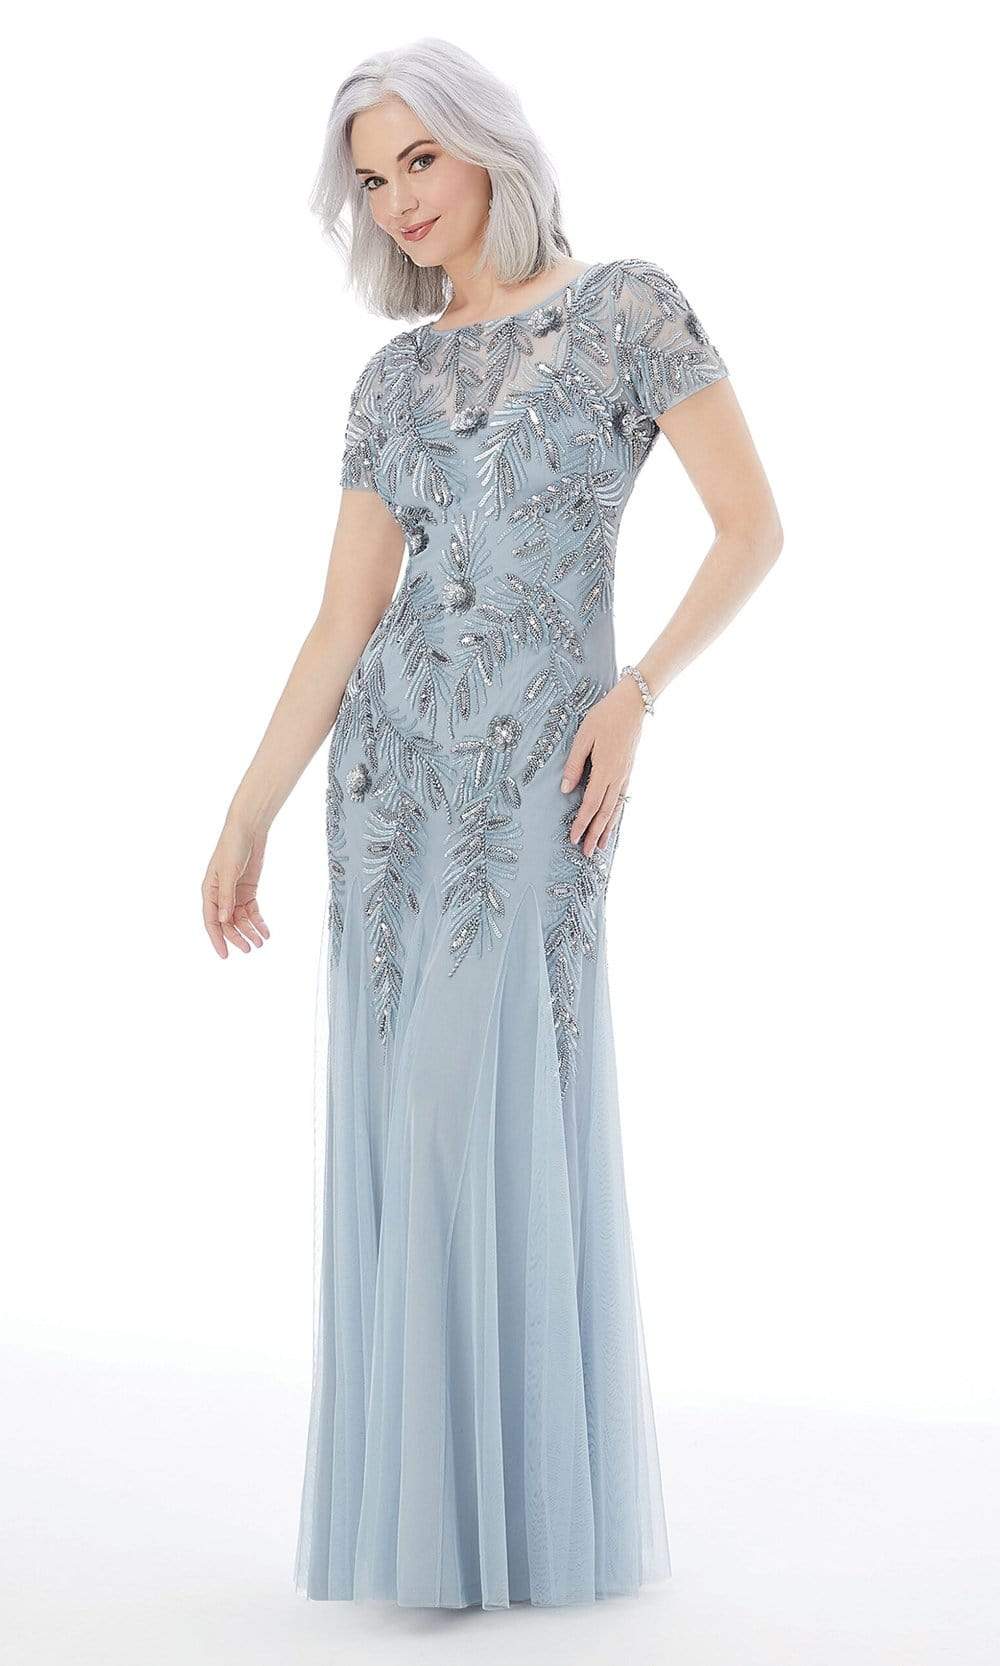 MGNY By Mori Lee - 72211 Sequin Ornate Mesh Column Godet Gown Mother of the Bride Dresses 2 / Light Blue